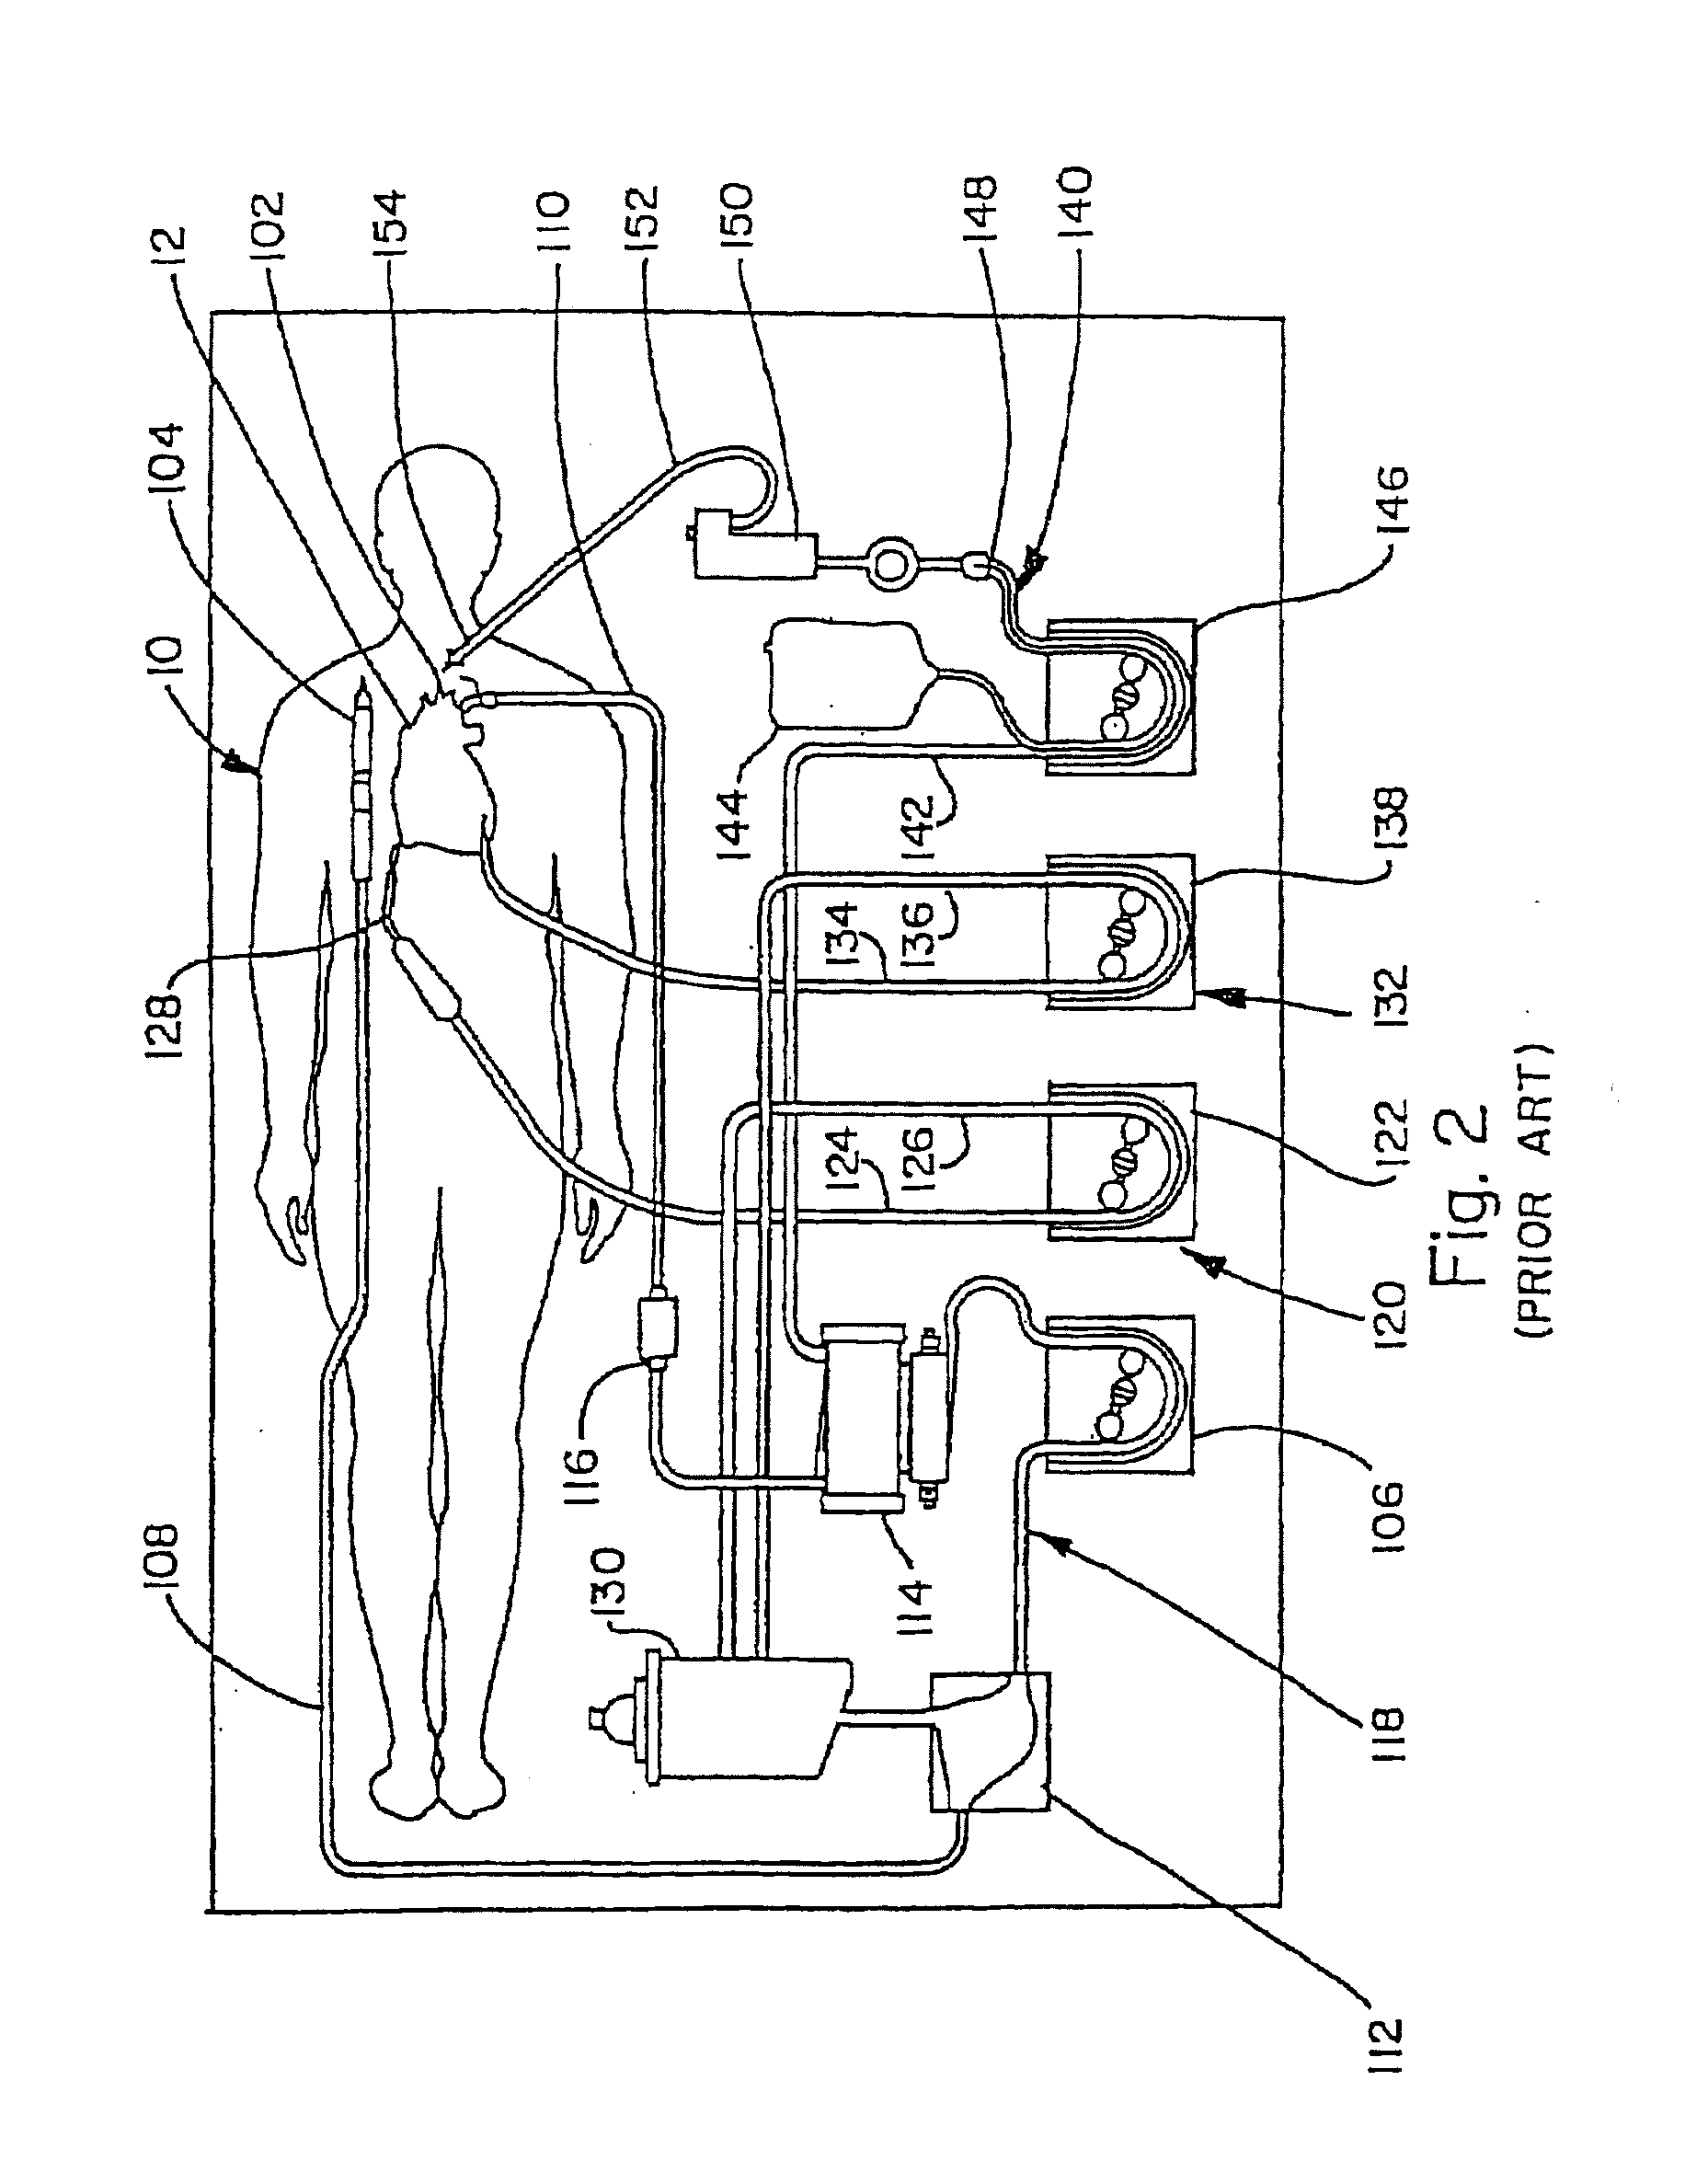 CPB System With Dual Function Blood Reservoir